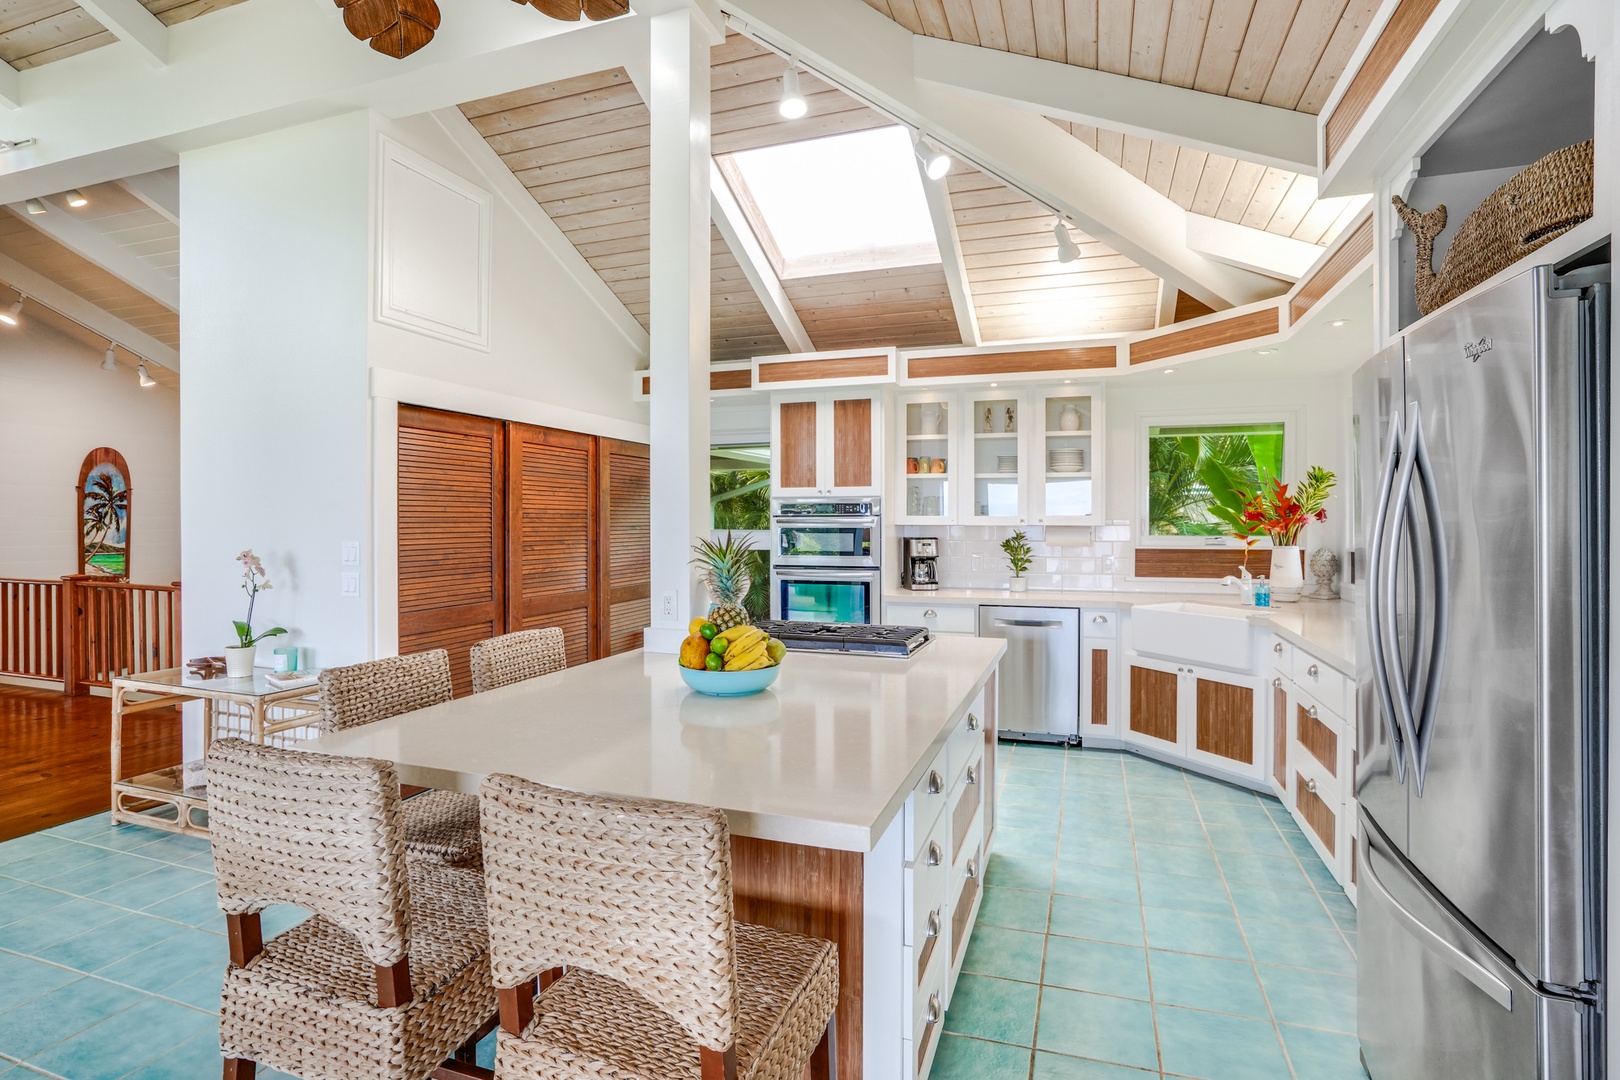 Princeville Vacation Rentals, Wai Lani - Under the majestic sweep of vaulted ceilings, our kitchen and dining area invite you to savor every moment and every meal.